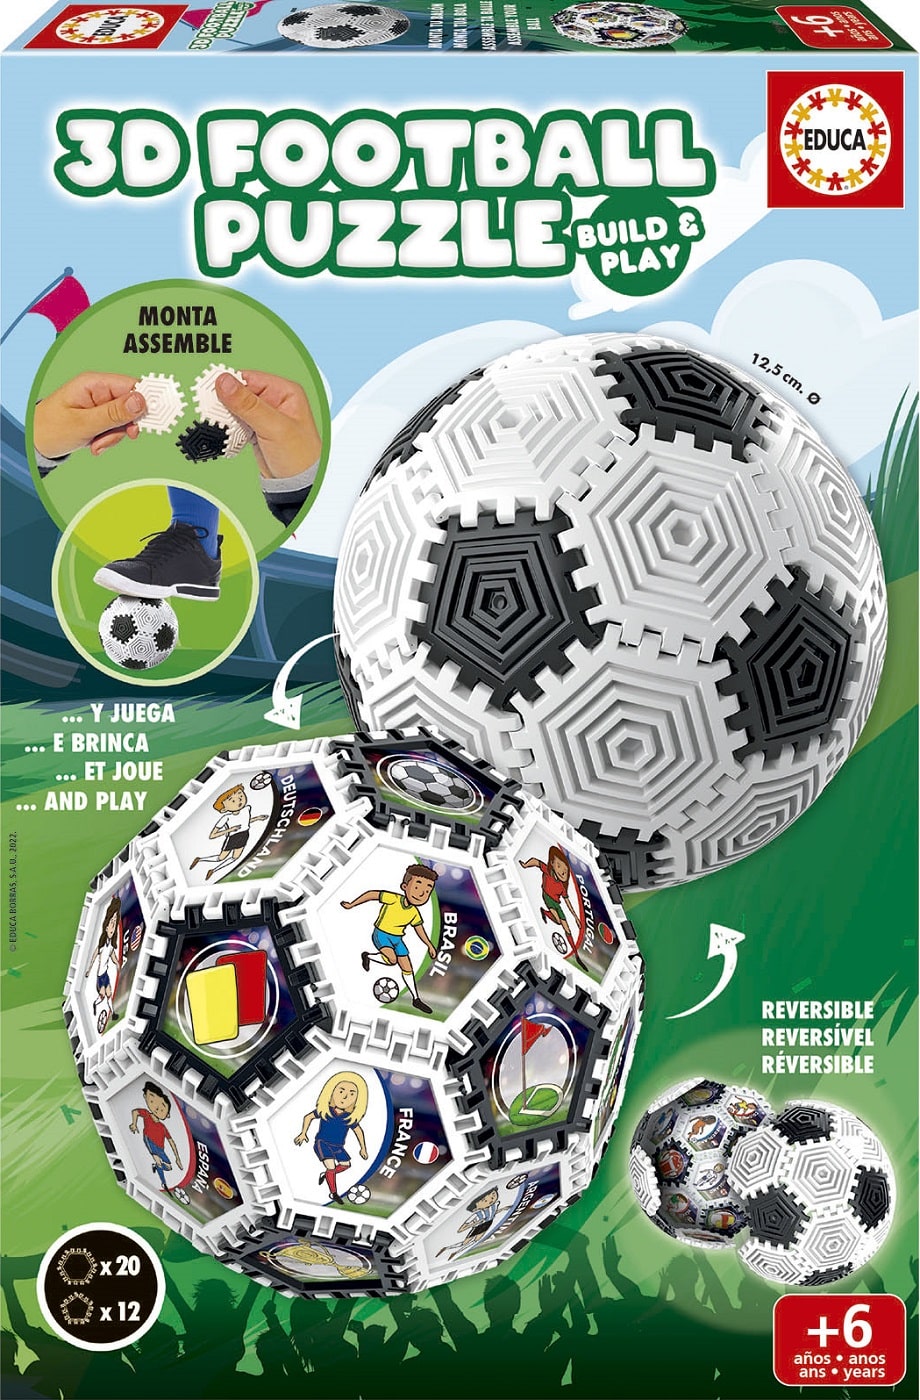 3D Football Puzzle Build and Play ( Educa 19210 ) imagen d